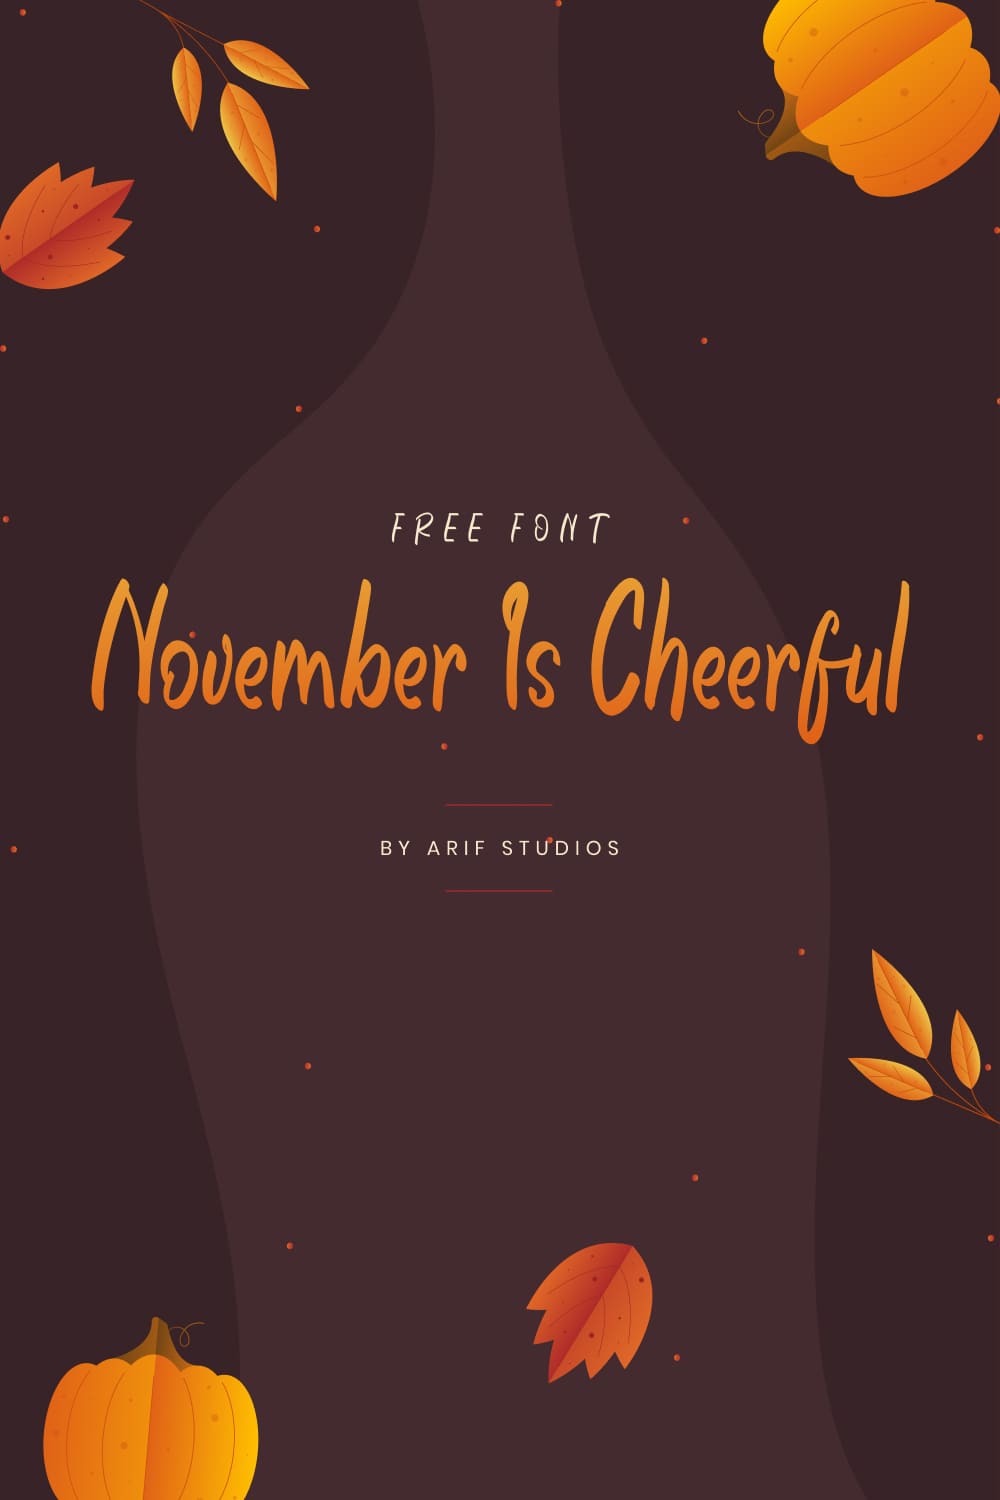 Free Font November Is Cheerful Pinterest Collage Image.